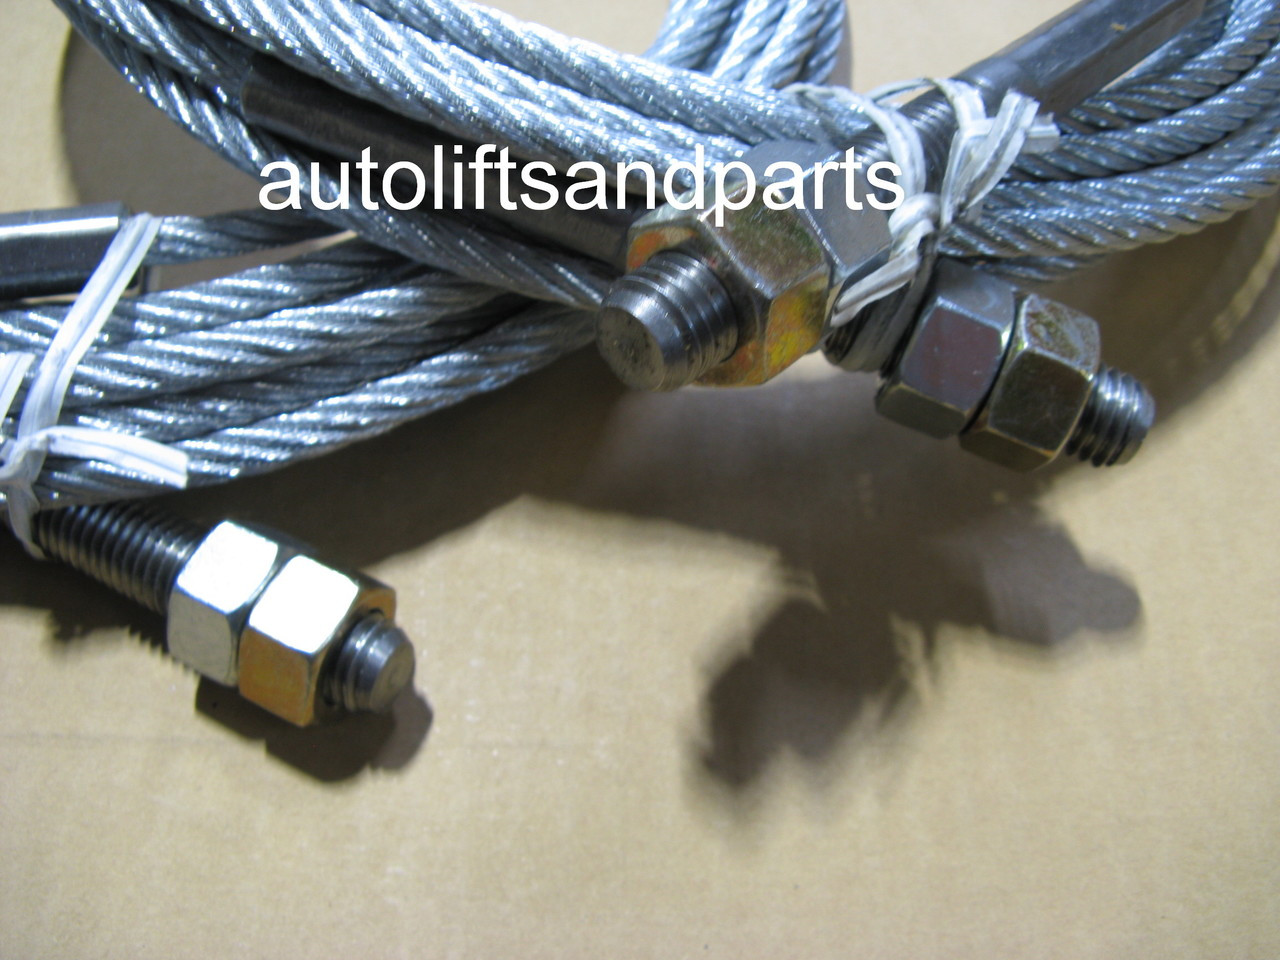 JSJ5-04-00 Equalizer Cables Pair (2) Challenger X-10 & E-10 Lift Early Version